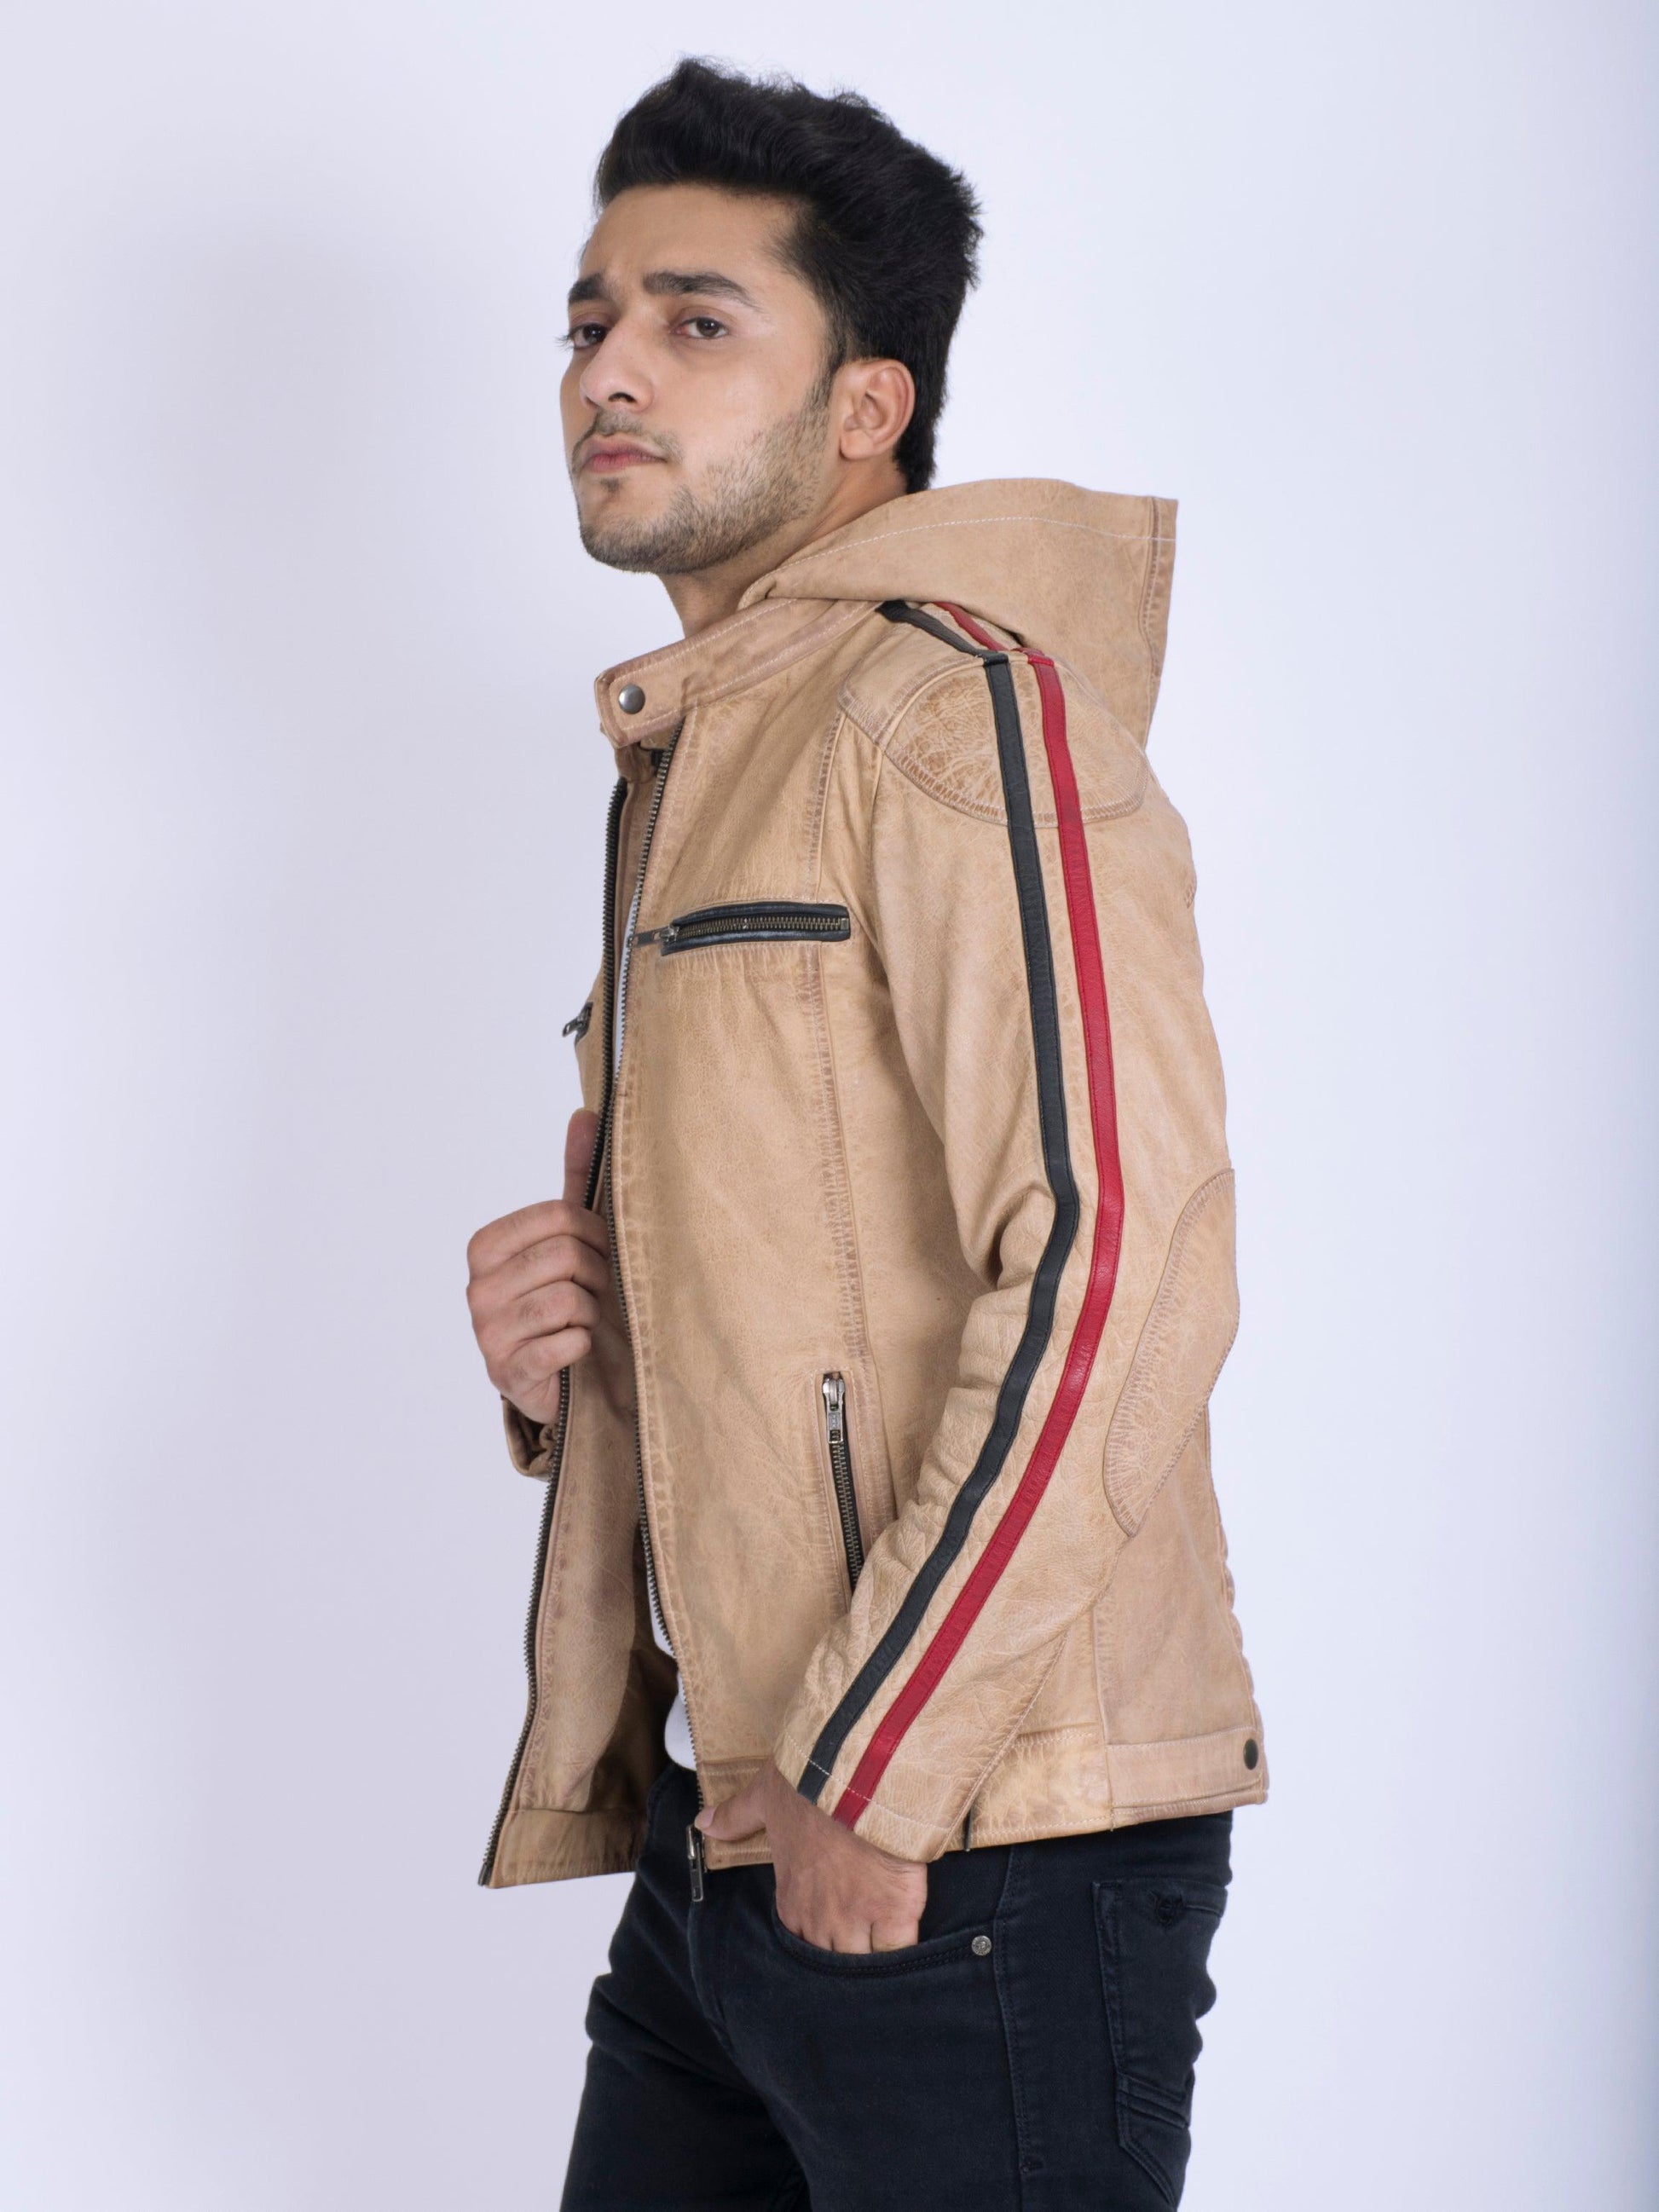 Contrast Cowhide Distressed Look Vintage Ivory Leather Jacket - CASA OF K Official Online Store